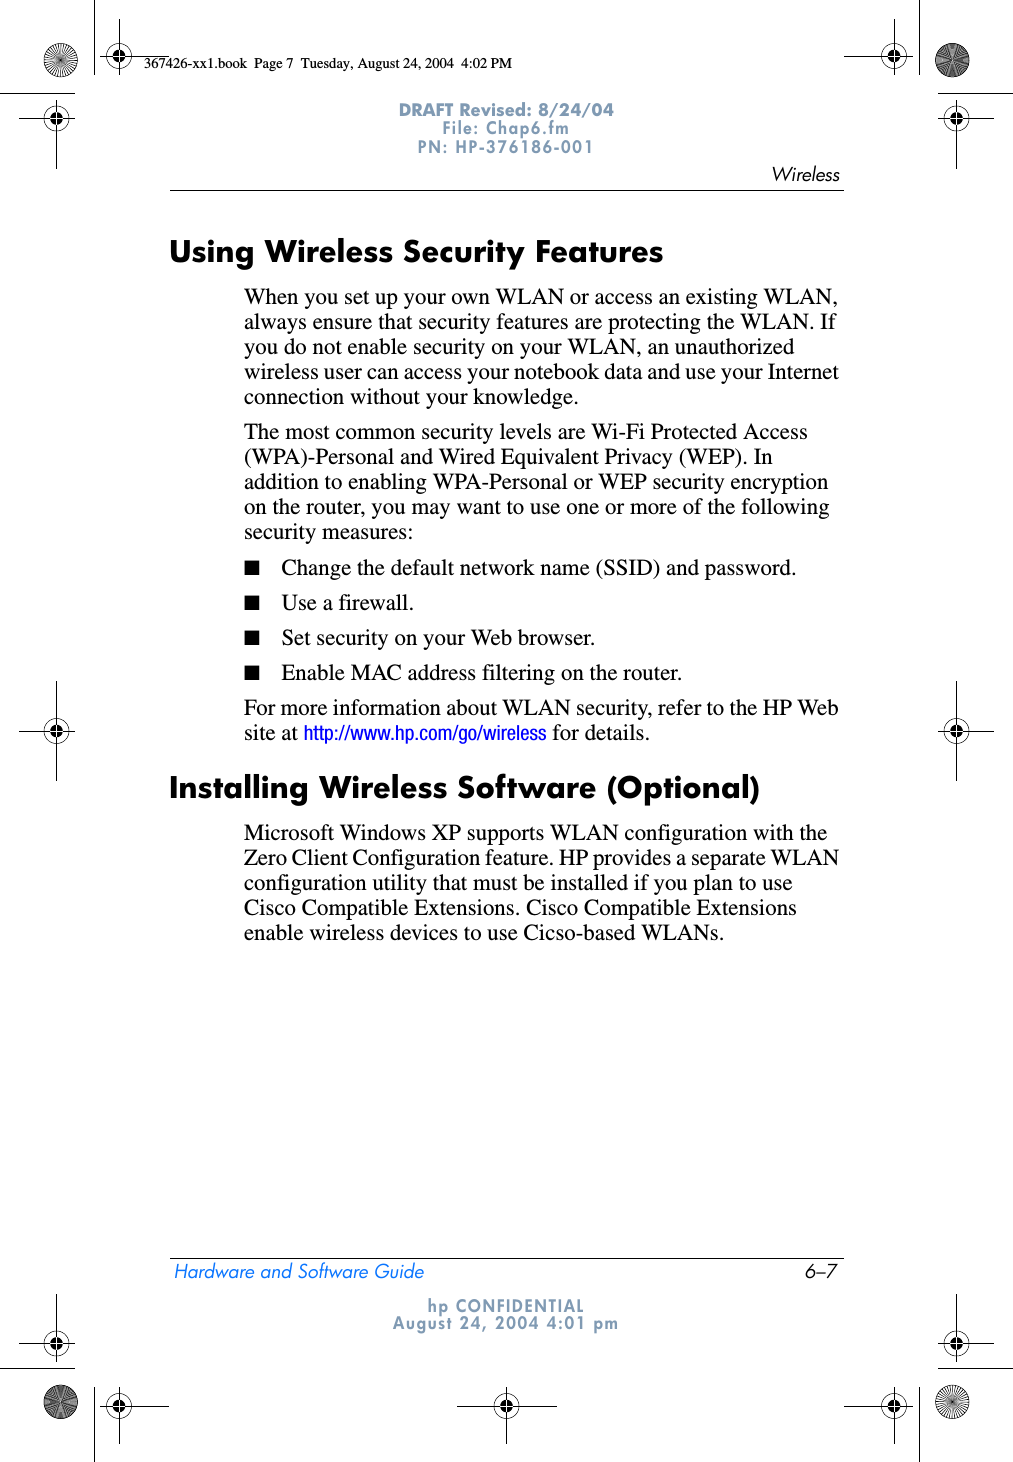 WirelessHardware and Software Guide 6–7DRAFT Revised: 8/24/04File: Chap6.fm PN: HP-376186-001 hp CONFIDENTIALAugust 24, 2004 4:01 pmUsing Wireless Security FeaturesWhen you set up your own WLAN or access an existing WLAN, always ensure that security features are protecting the WLAN. If you do not enable security on your WLAN, an unauthorized wireless user can access your notebook data and use your Internet connection without your knowledge.The most common security levels are Wi-Fi Protected Access (WPA)-Personal and Wired Equivalent Privacy (WEP). In addition to enabling WPA-Personal or WEP security encryption on the router, you may want to use one or more of the following security measures:■Change the default network name (SSID) and password.■Use a firewall.■Set security on your Web browser.■Enable MAC address filtering on the router.For more information about WLAN security, refer to the HP Web site at http://www.hp.com/go/wireless for details.Installing Wireless Software (Optional)Microsoft Windows XP supports WLAN configuration with the Zero Client Configuration feature. HP provides a separate WLAN configuration utility that must be installed if you plan to use Cisco Compatible Extensions. Cisco Compatible Extensions enable wireless devices to use Cicso-based WLANs.367426-xx1.book  Page 7  Tuesday, August 24, 2004  4:02 PM